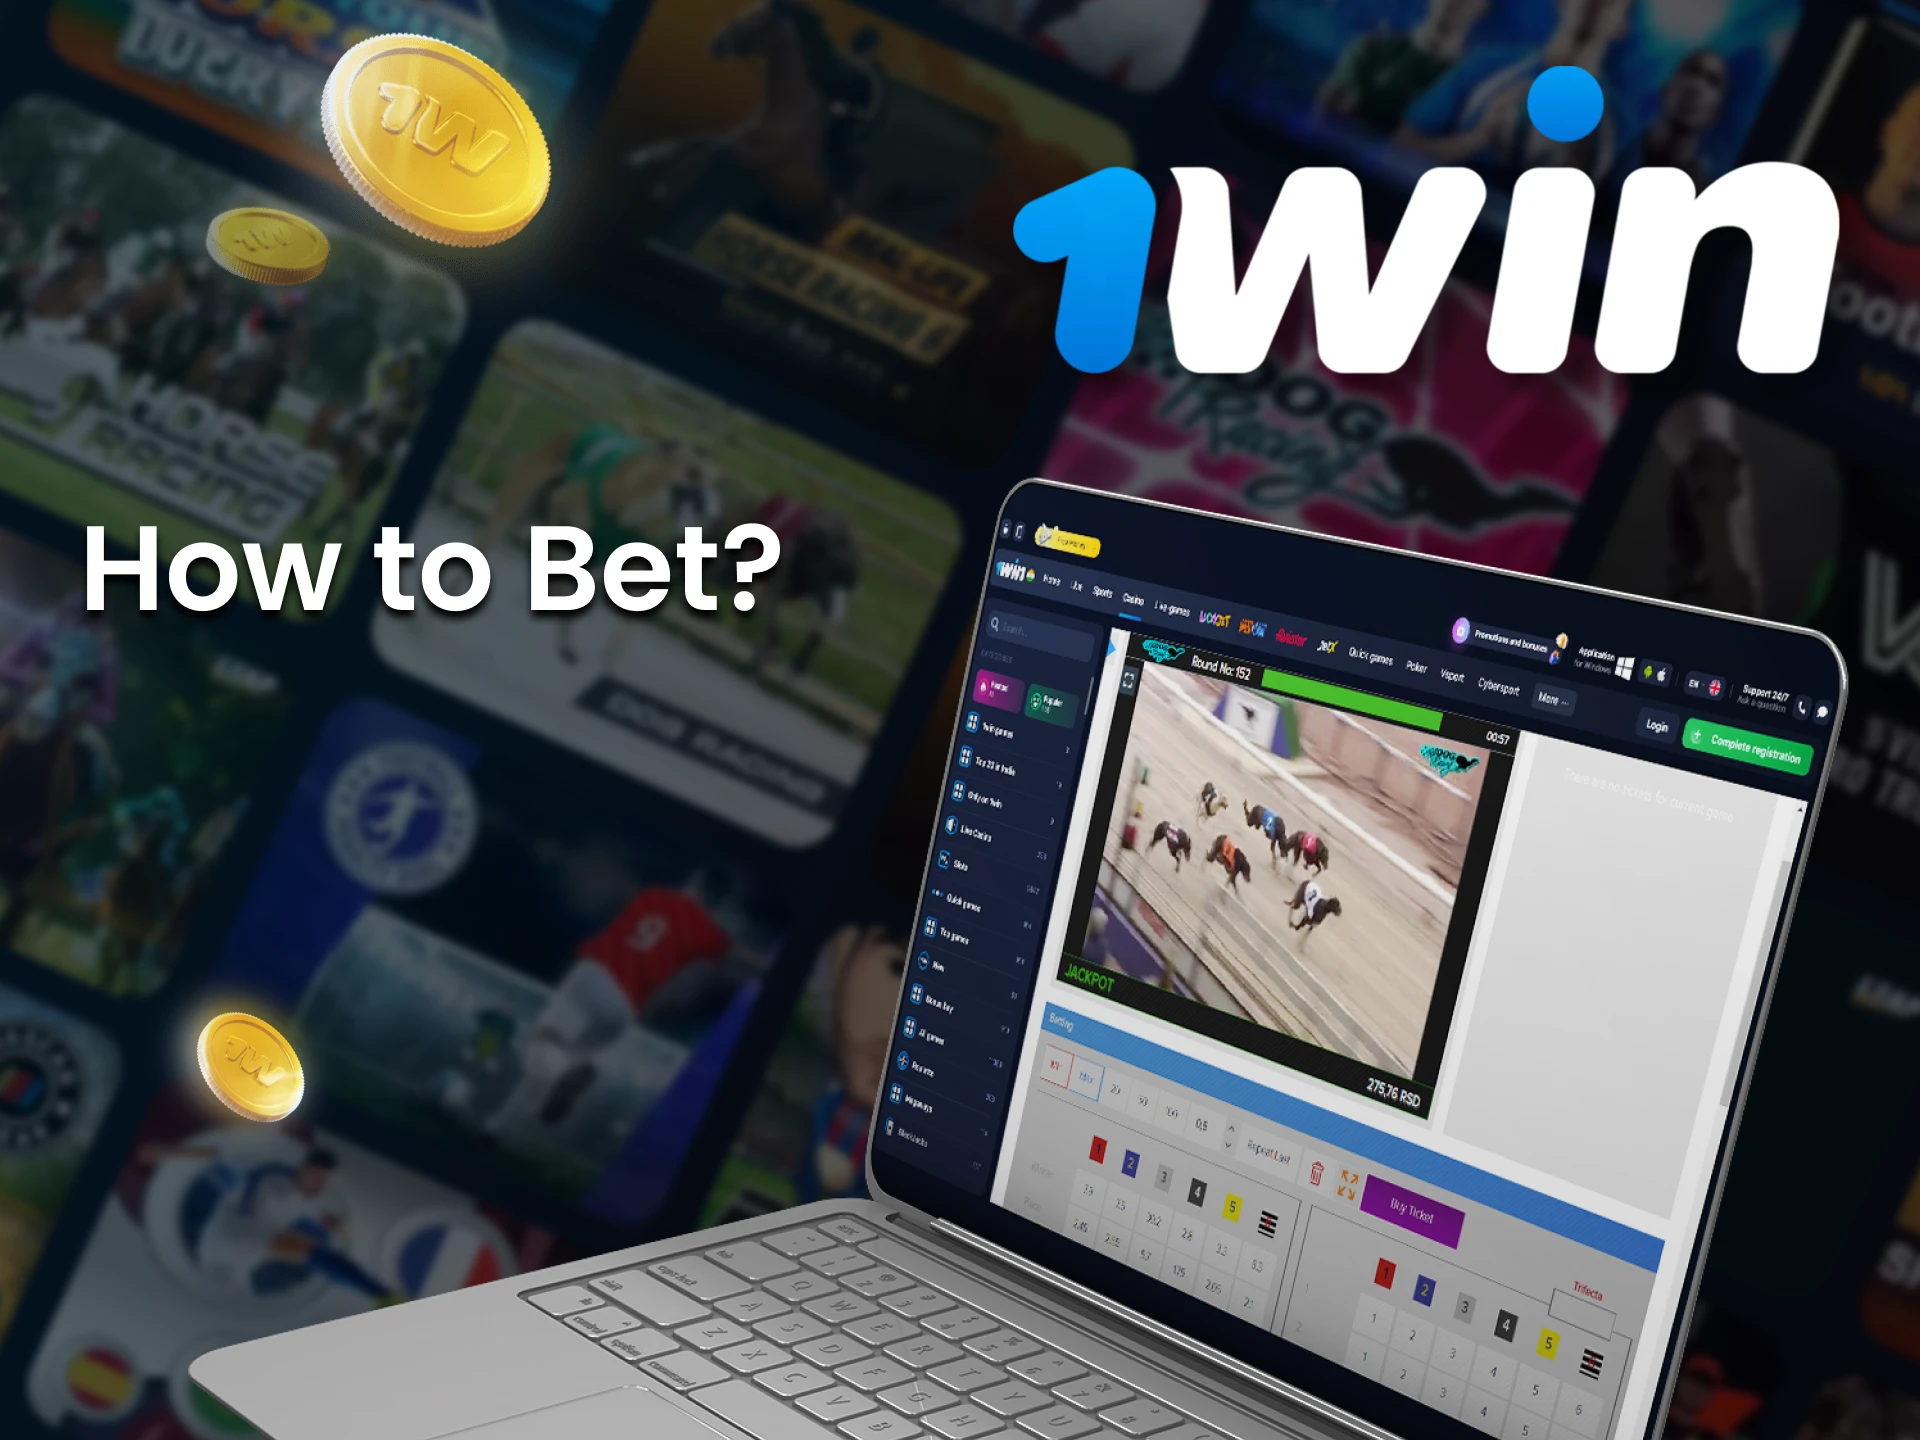 Go to 1Win Virtual Sports section to place bets.